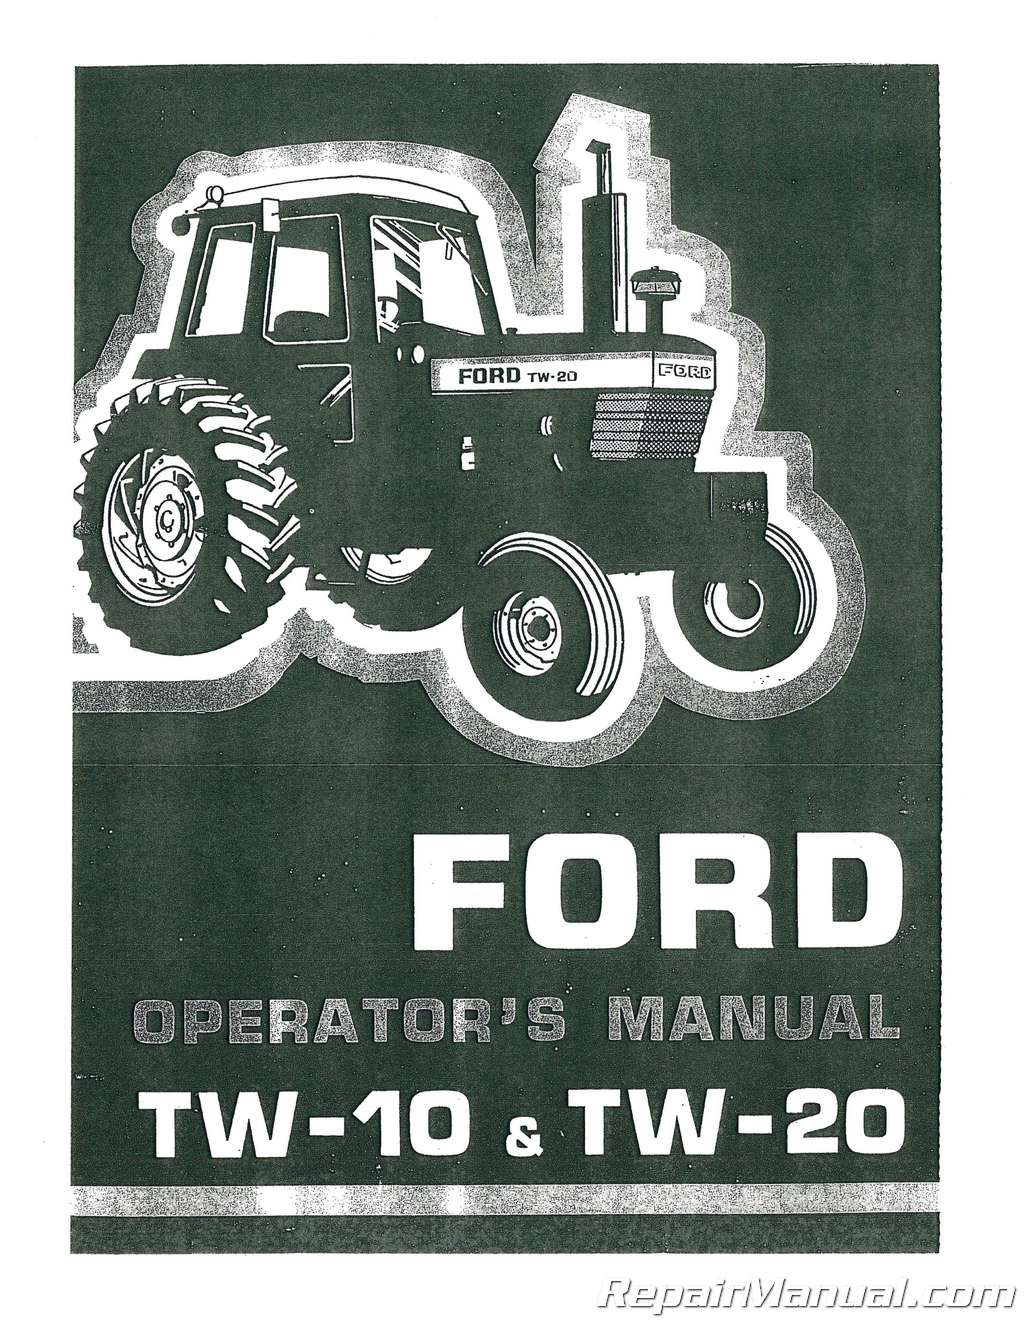 TW-20 TW-30 Tractor Repair Shop Service Manual CD TW20 FORD TW10 TW30 TW-10 